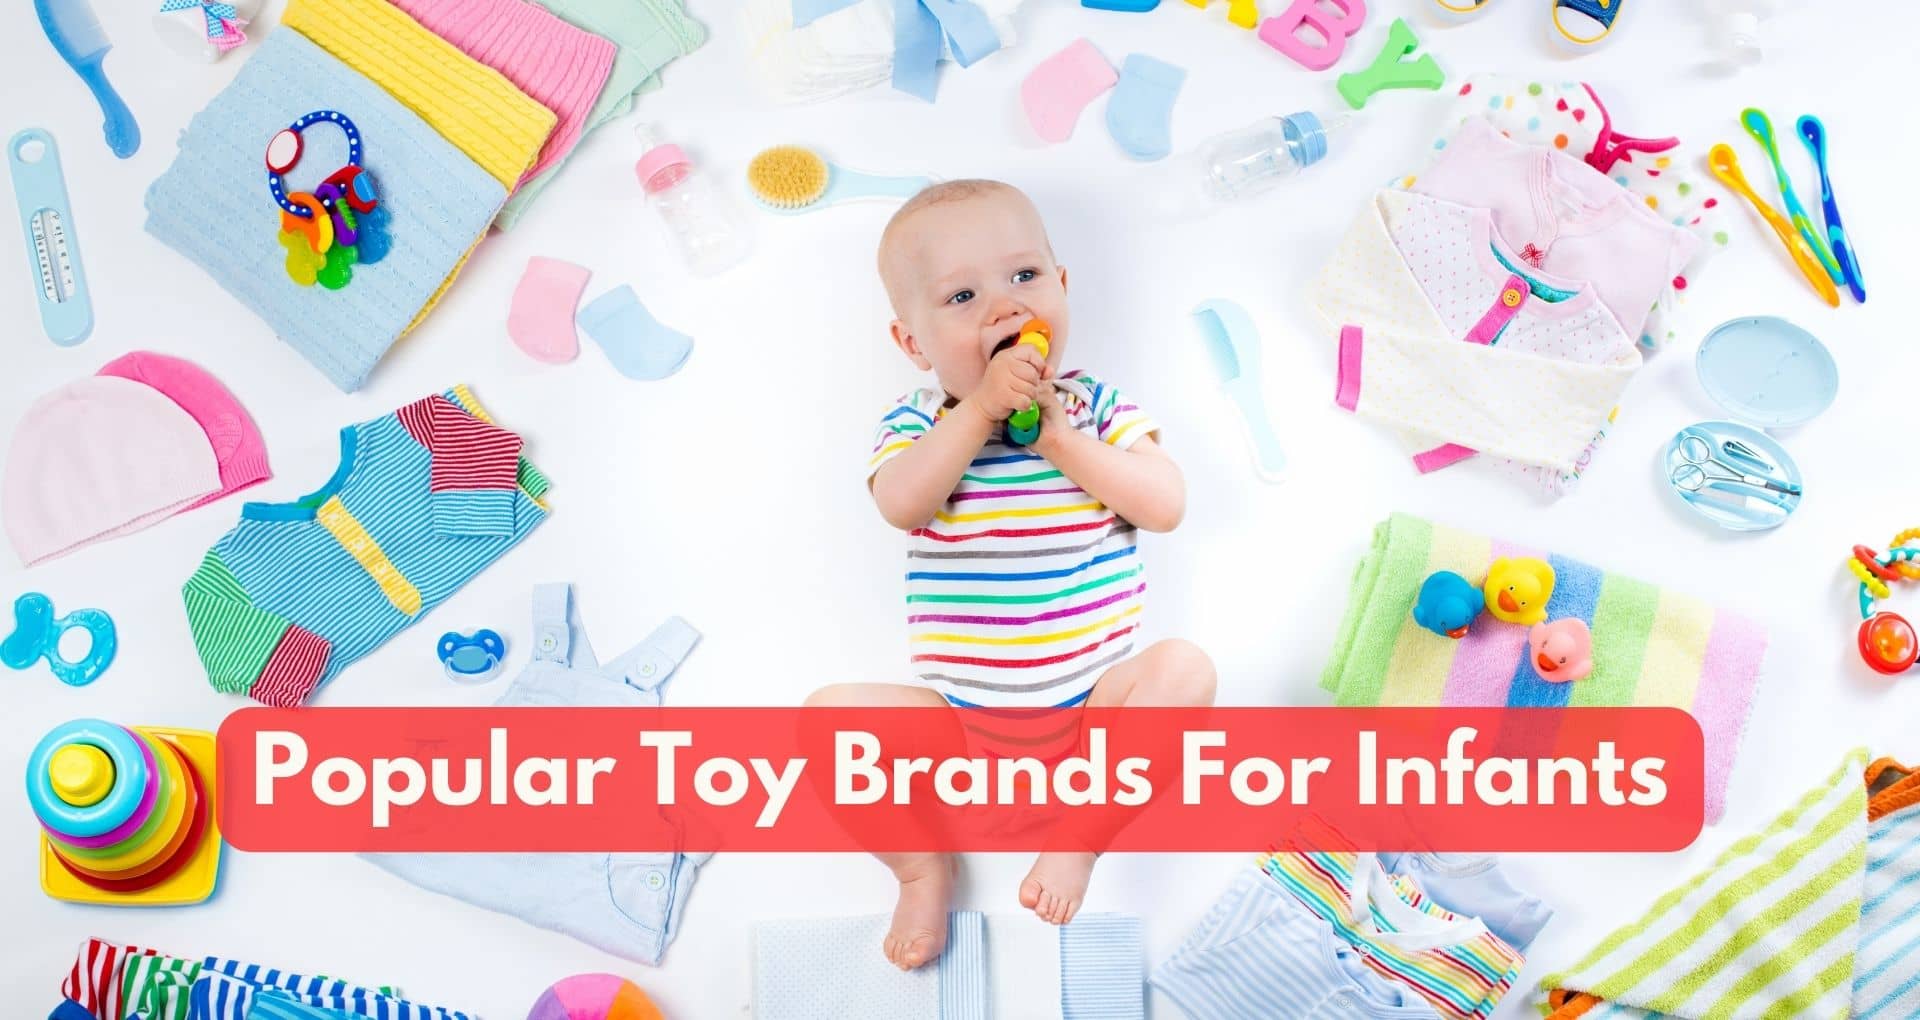 What Are Some Popular Toy Brands For Infants?